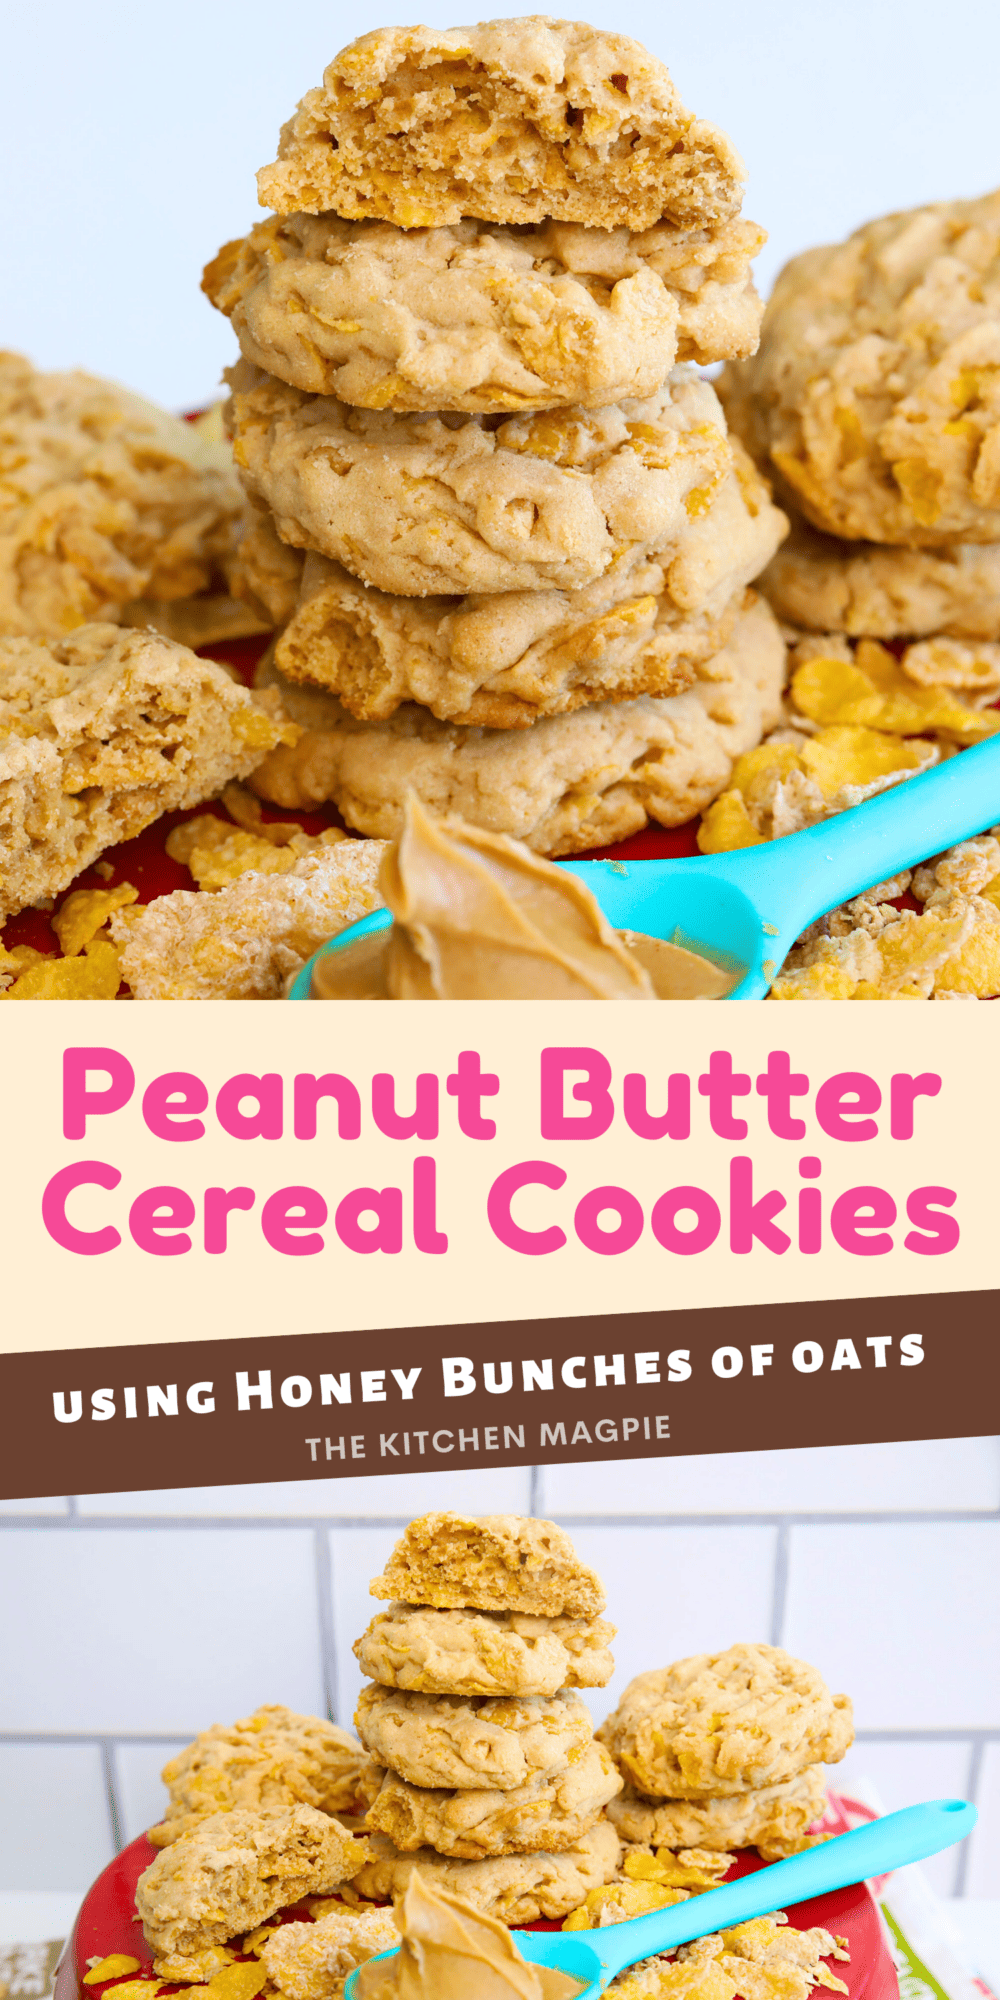 Delicious cereal cookies using Honey Bunches of Oats and peanut butter! These are a a great way of using the last of the cereal left in the box.